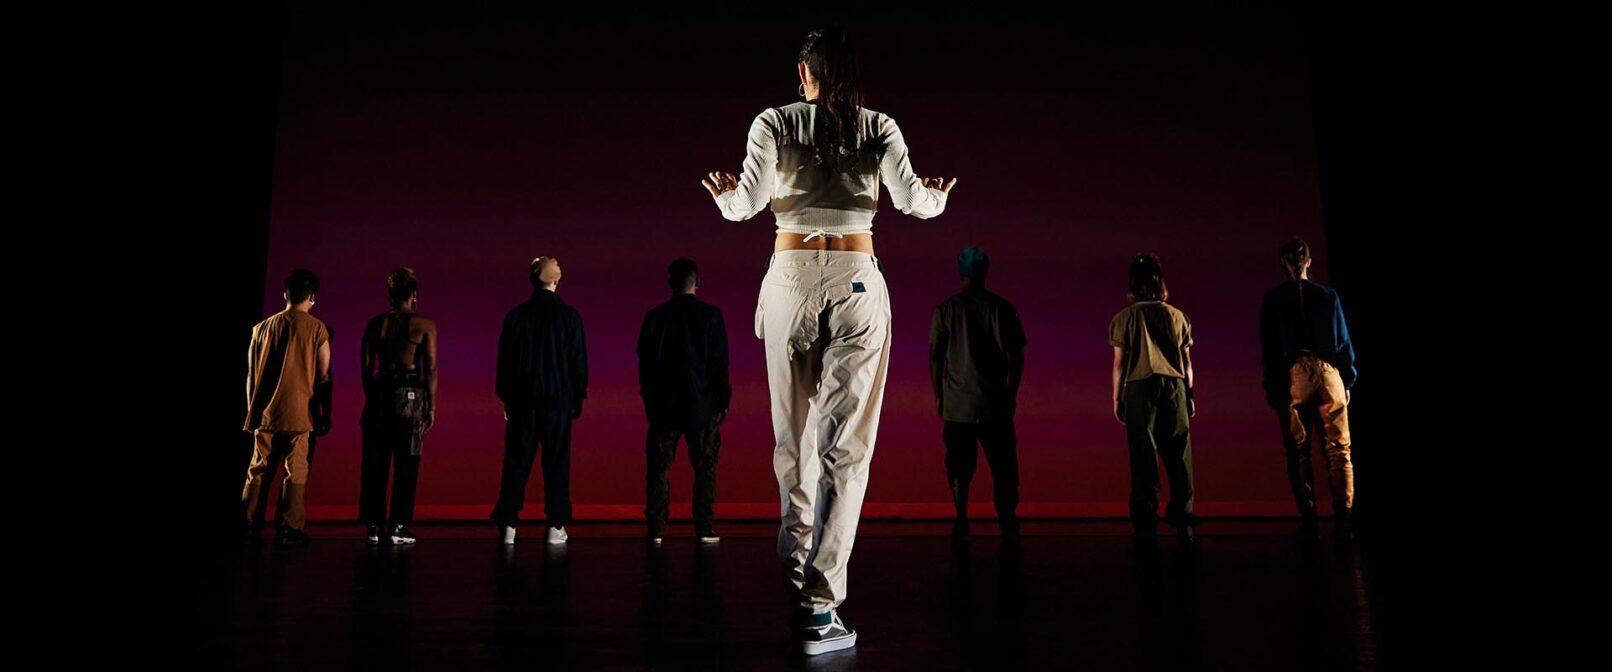 Bboyizm. Light skinned woman with long dark hair, dressed in a long sleeve white crop top, baggy white pants and sneakers stands at the front of a stage with her back to the camera and arms slightly raised. A row of seven people in shadow stand at the back of the stage.